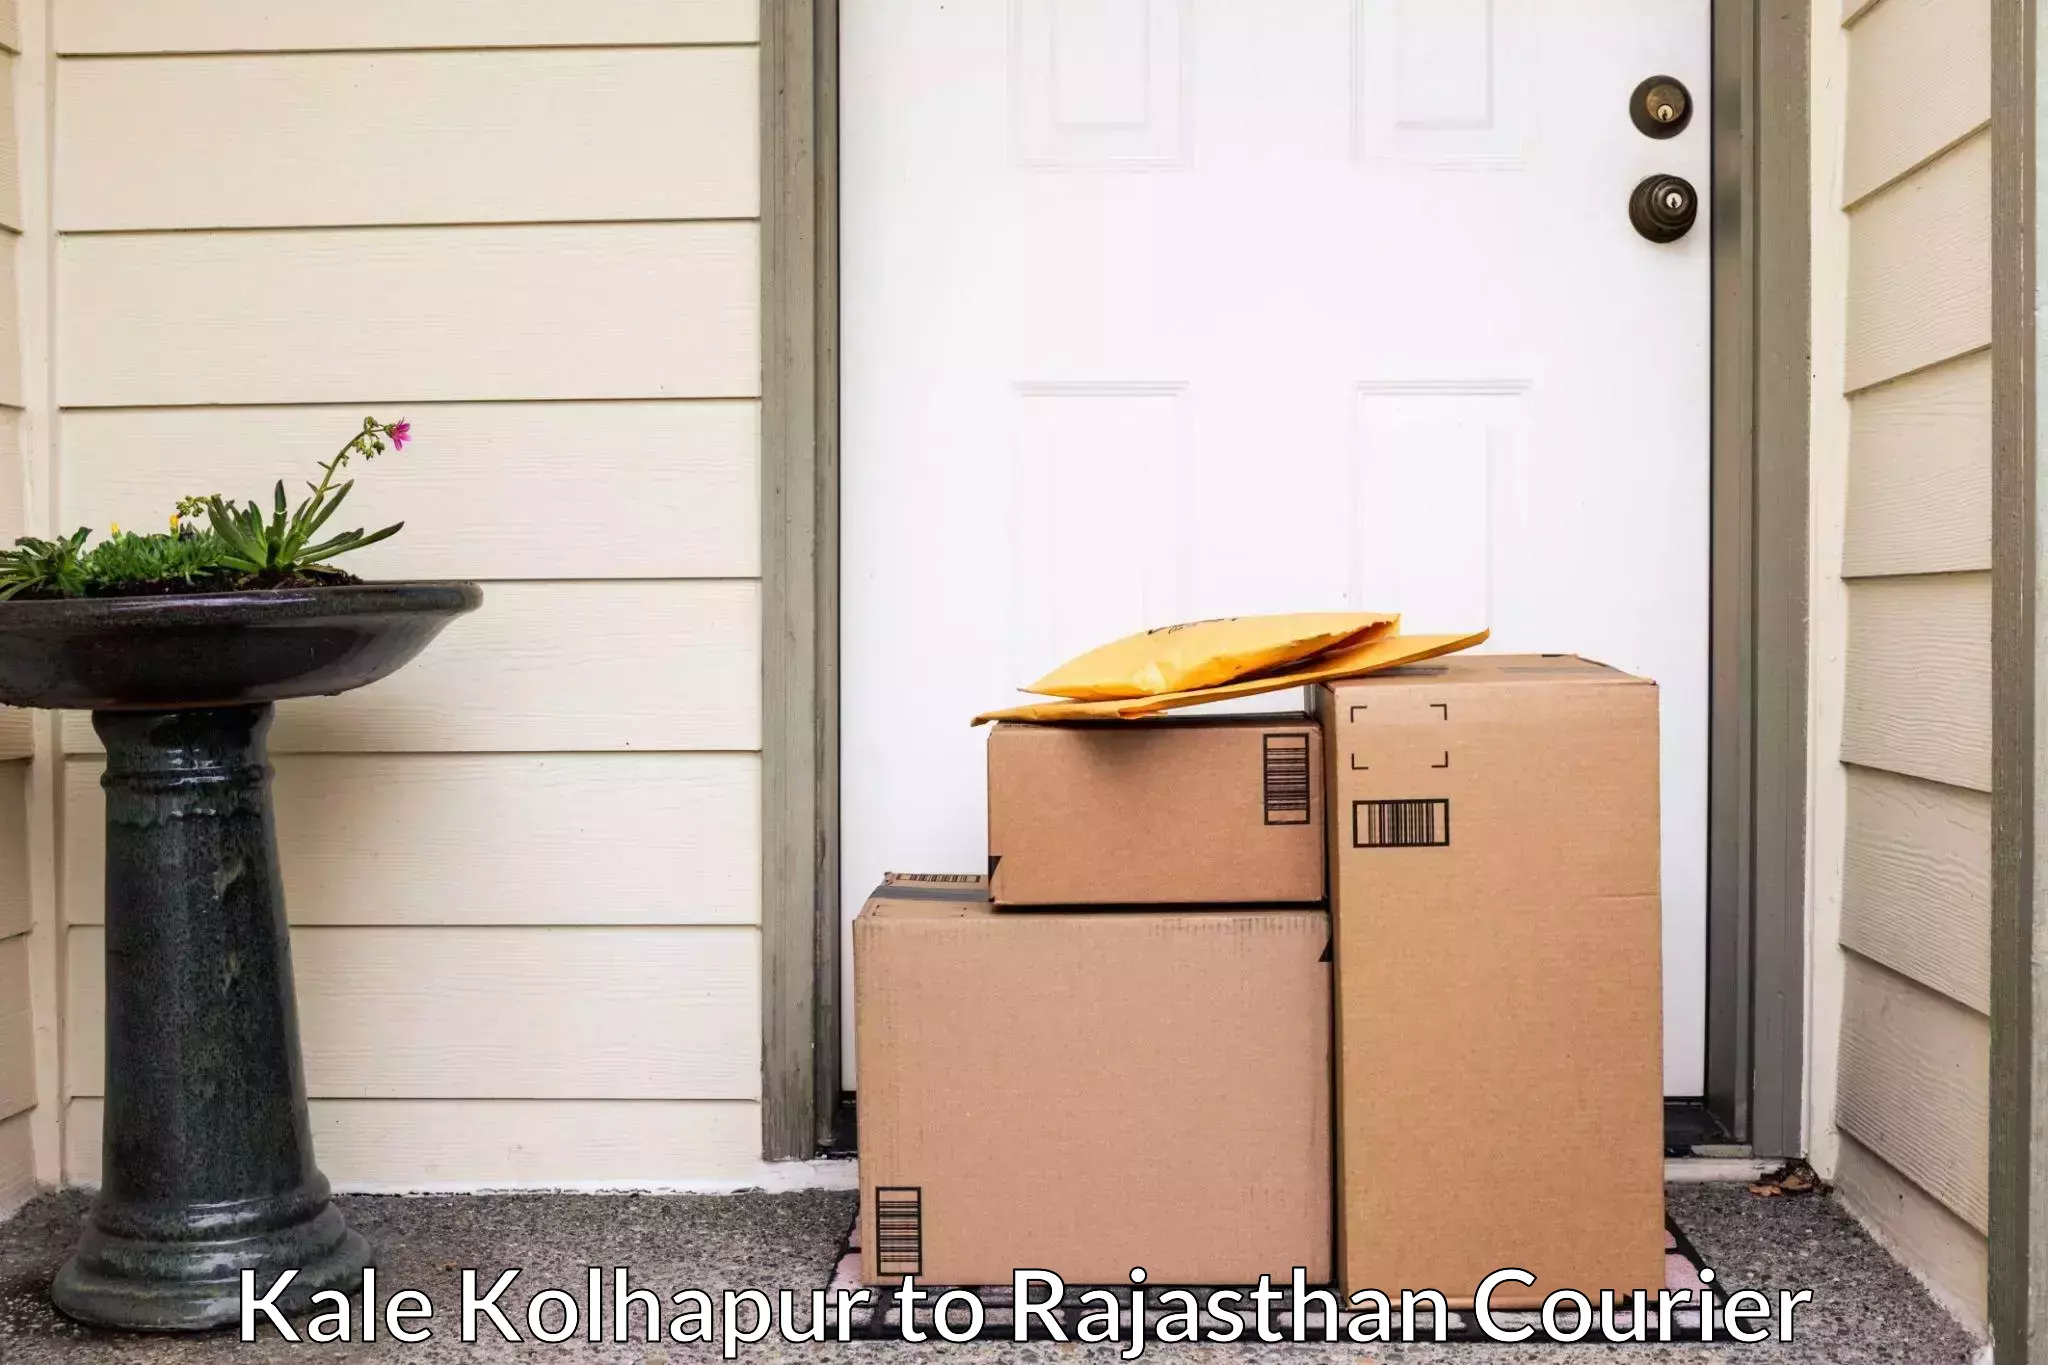 Hassle-free relocation Kale Kolhapur to Khanpur